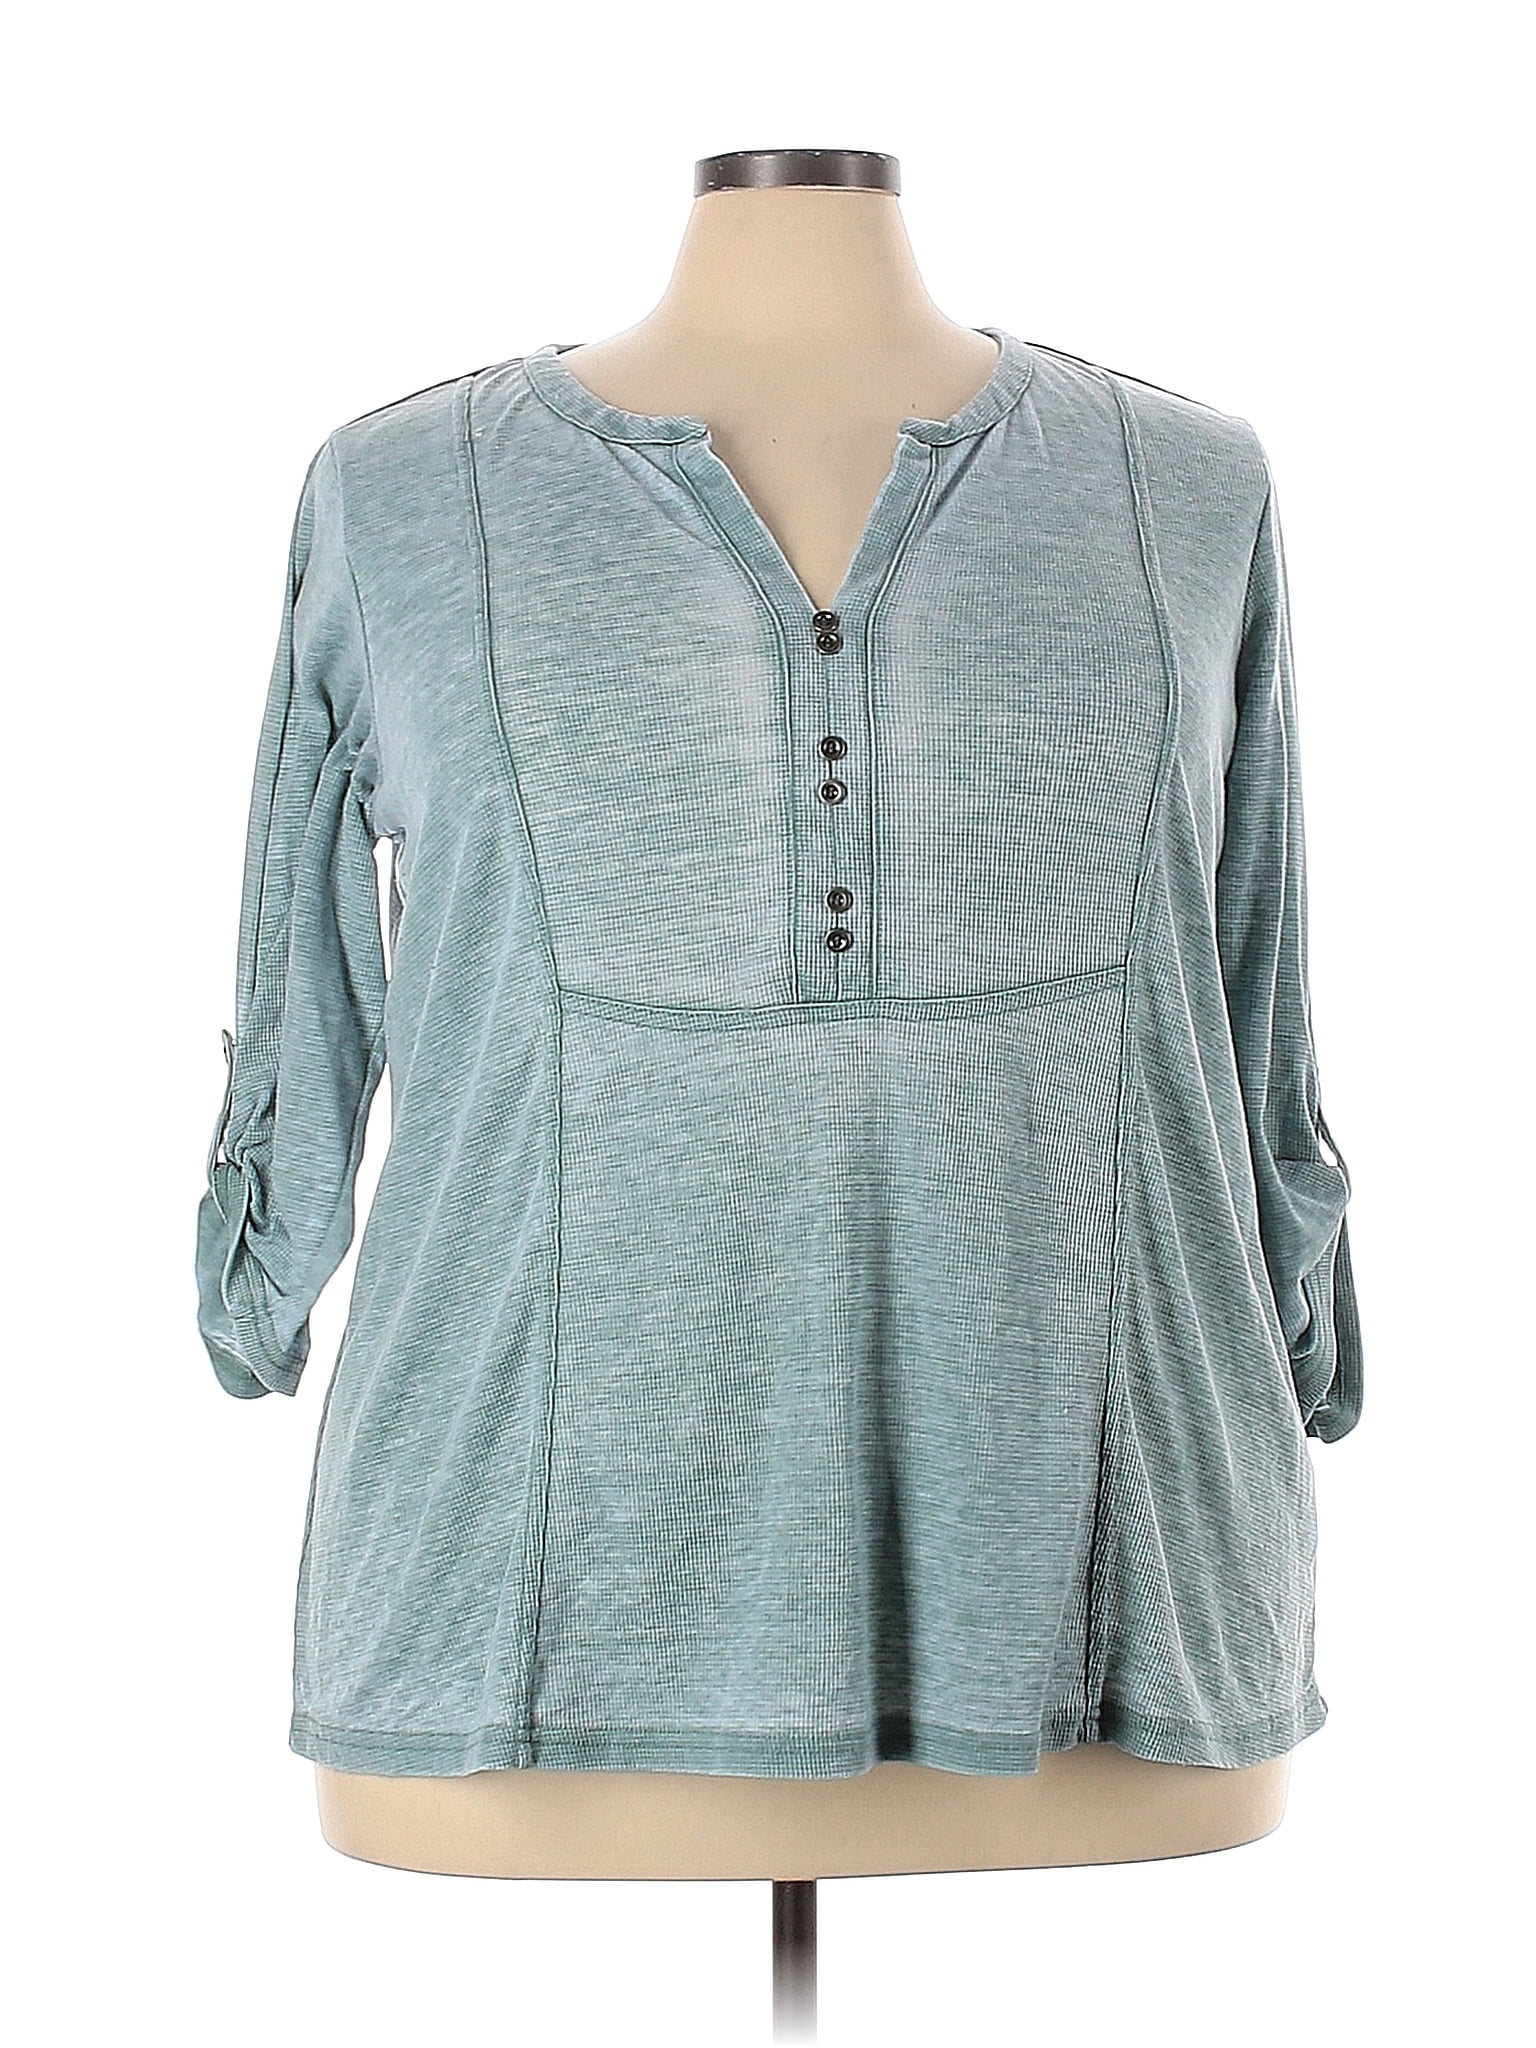 Jane and Delancey Teal Long Sleeve Henley Size 3X (Plus) - 49% off ...